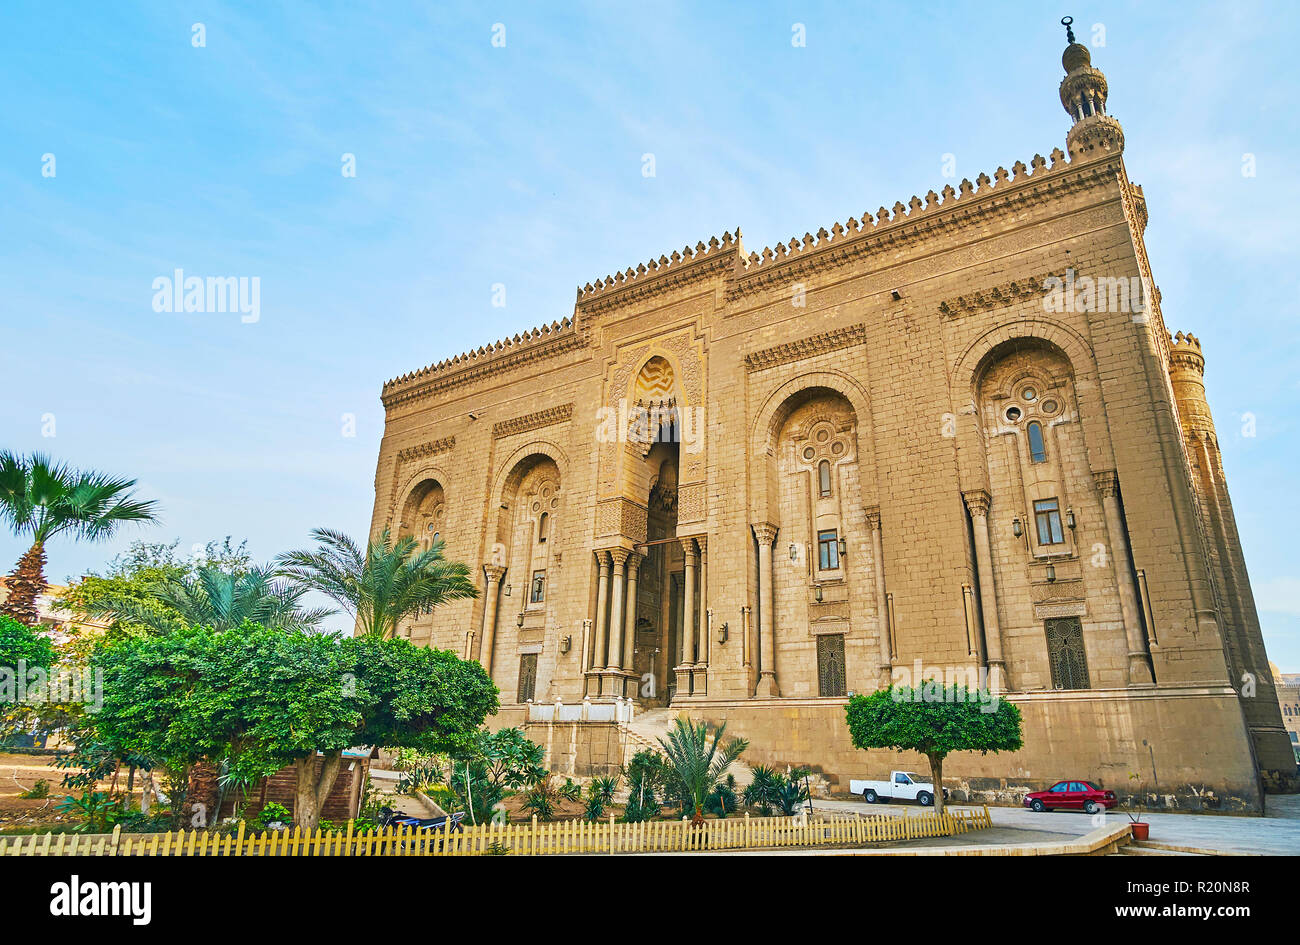 The monumental building of historic Al-rifai Mosque with slender pillars, stone carvings and tall scenc portal (iwan), Cairo, Egypt. Stock Photo